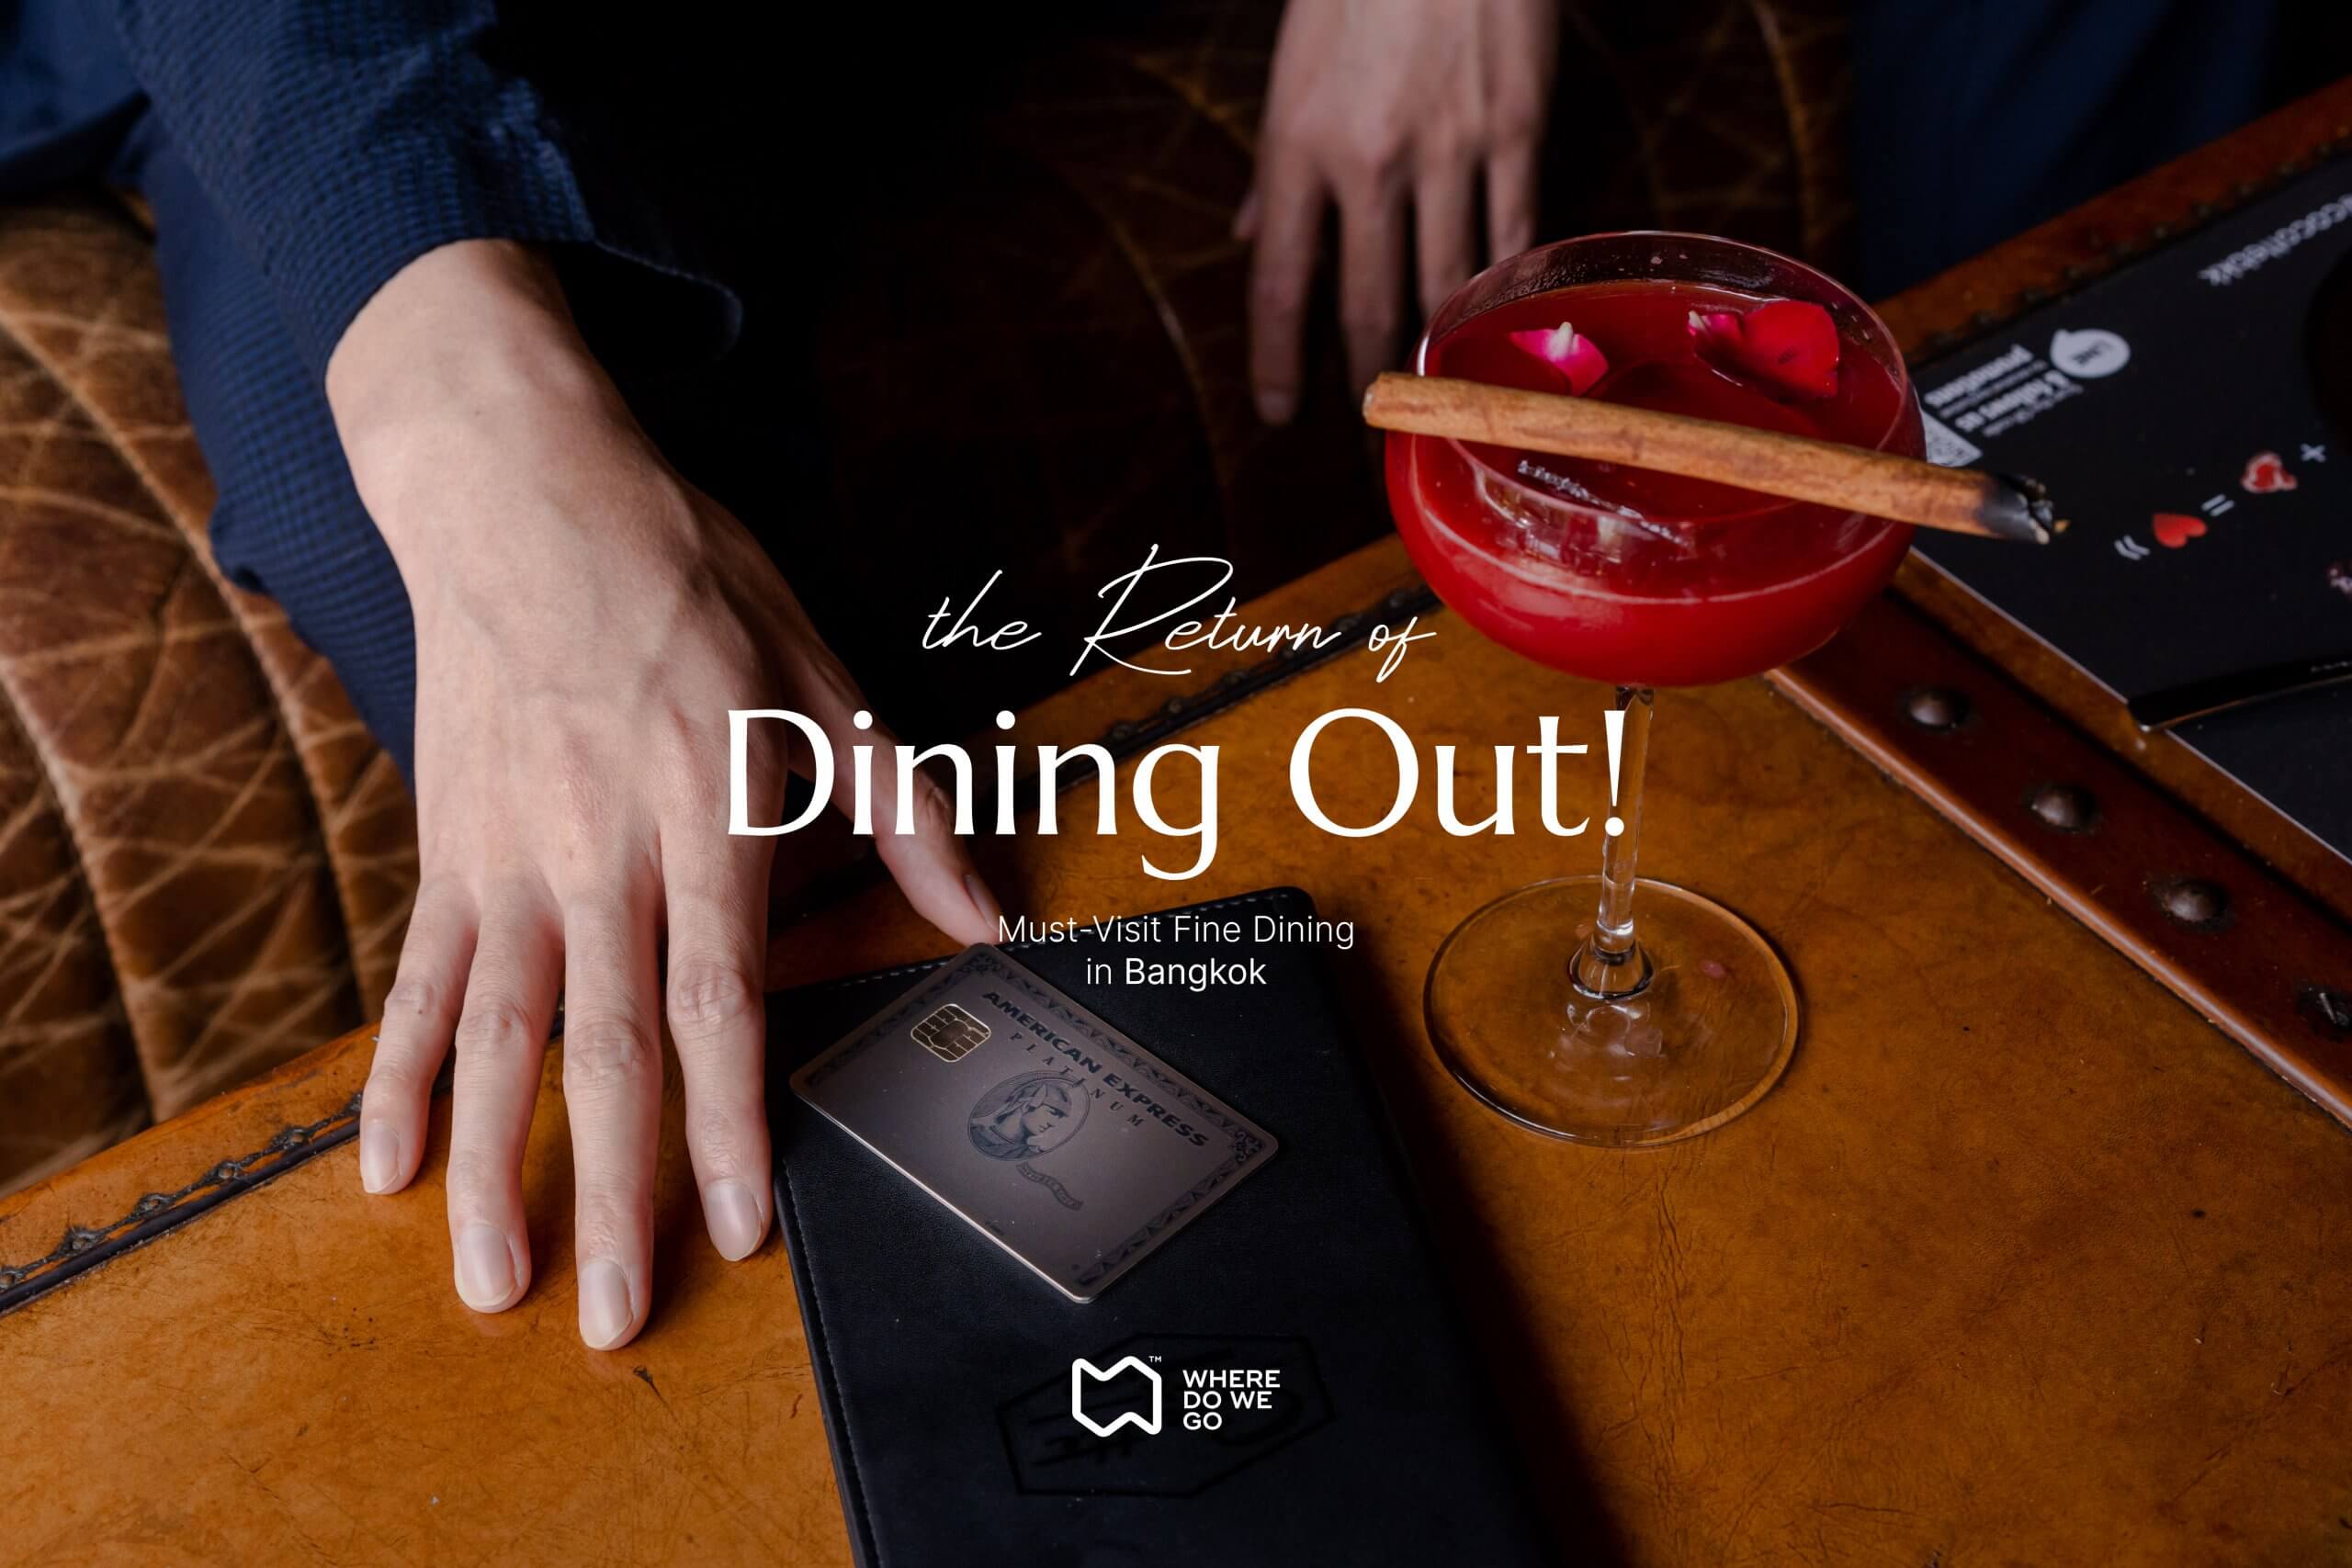 The Return of Dining Out!